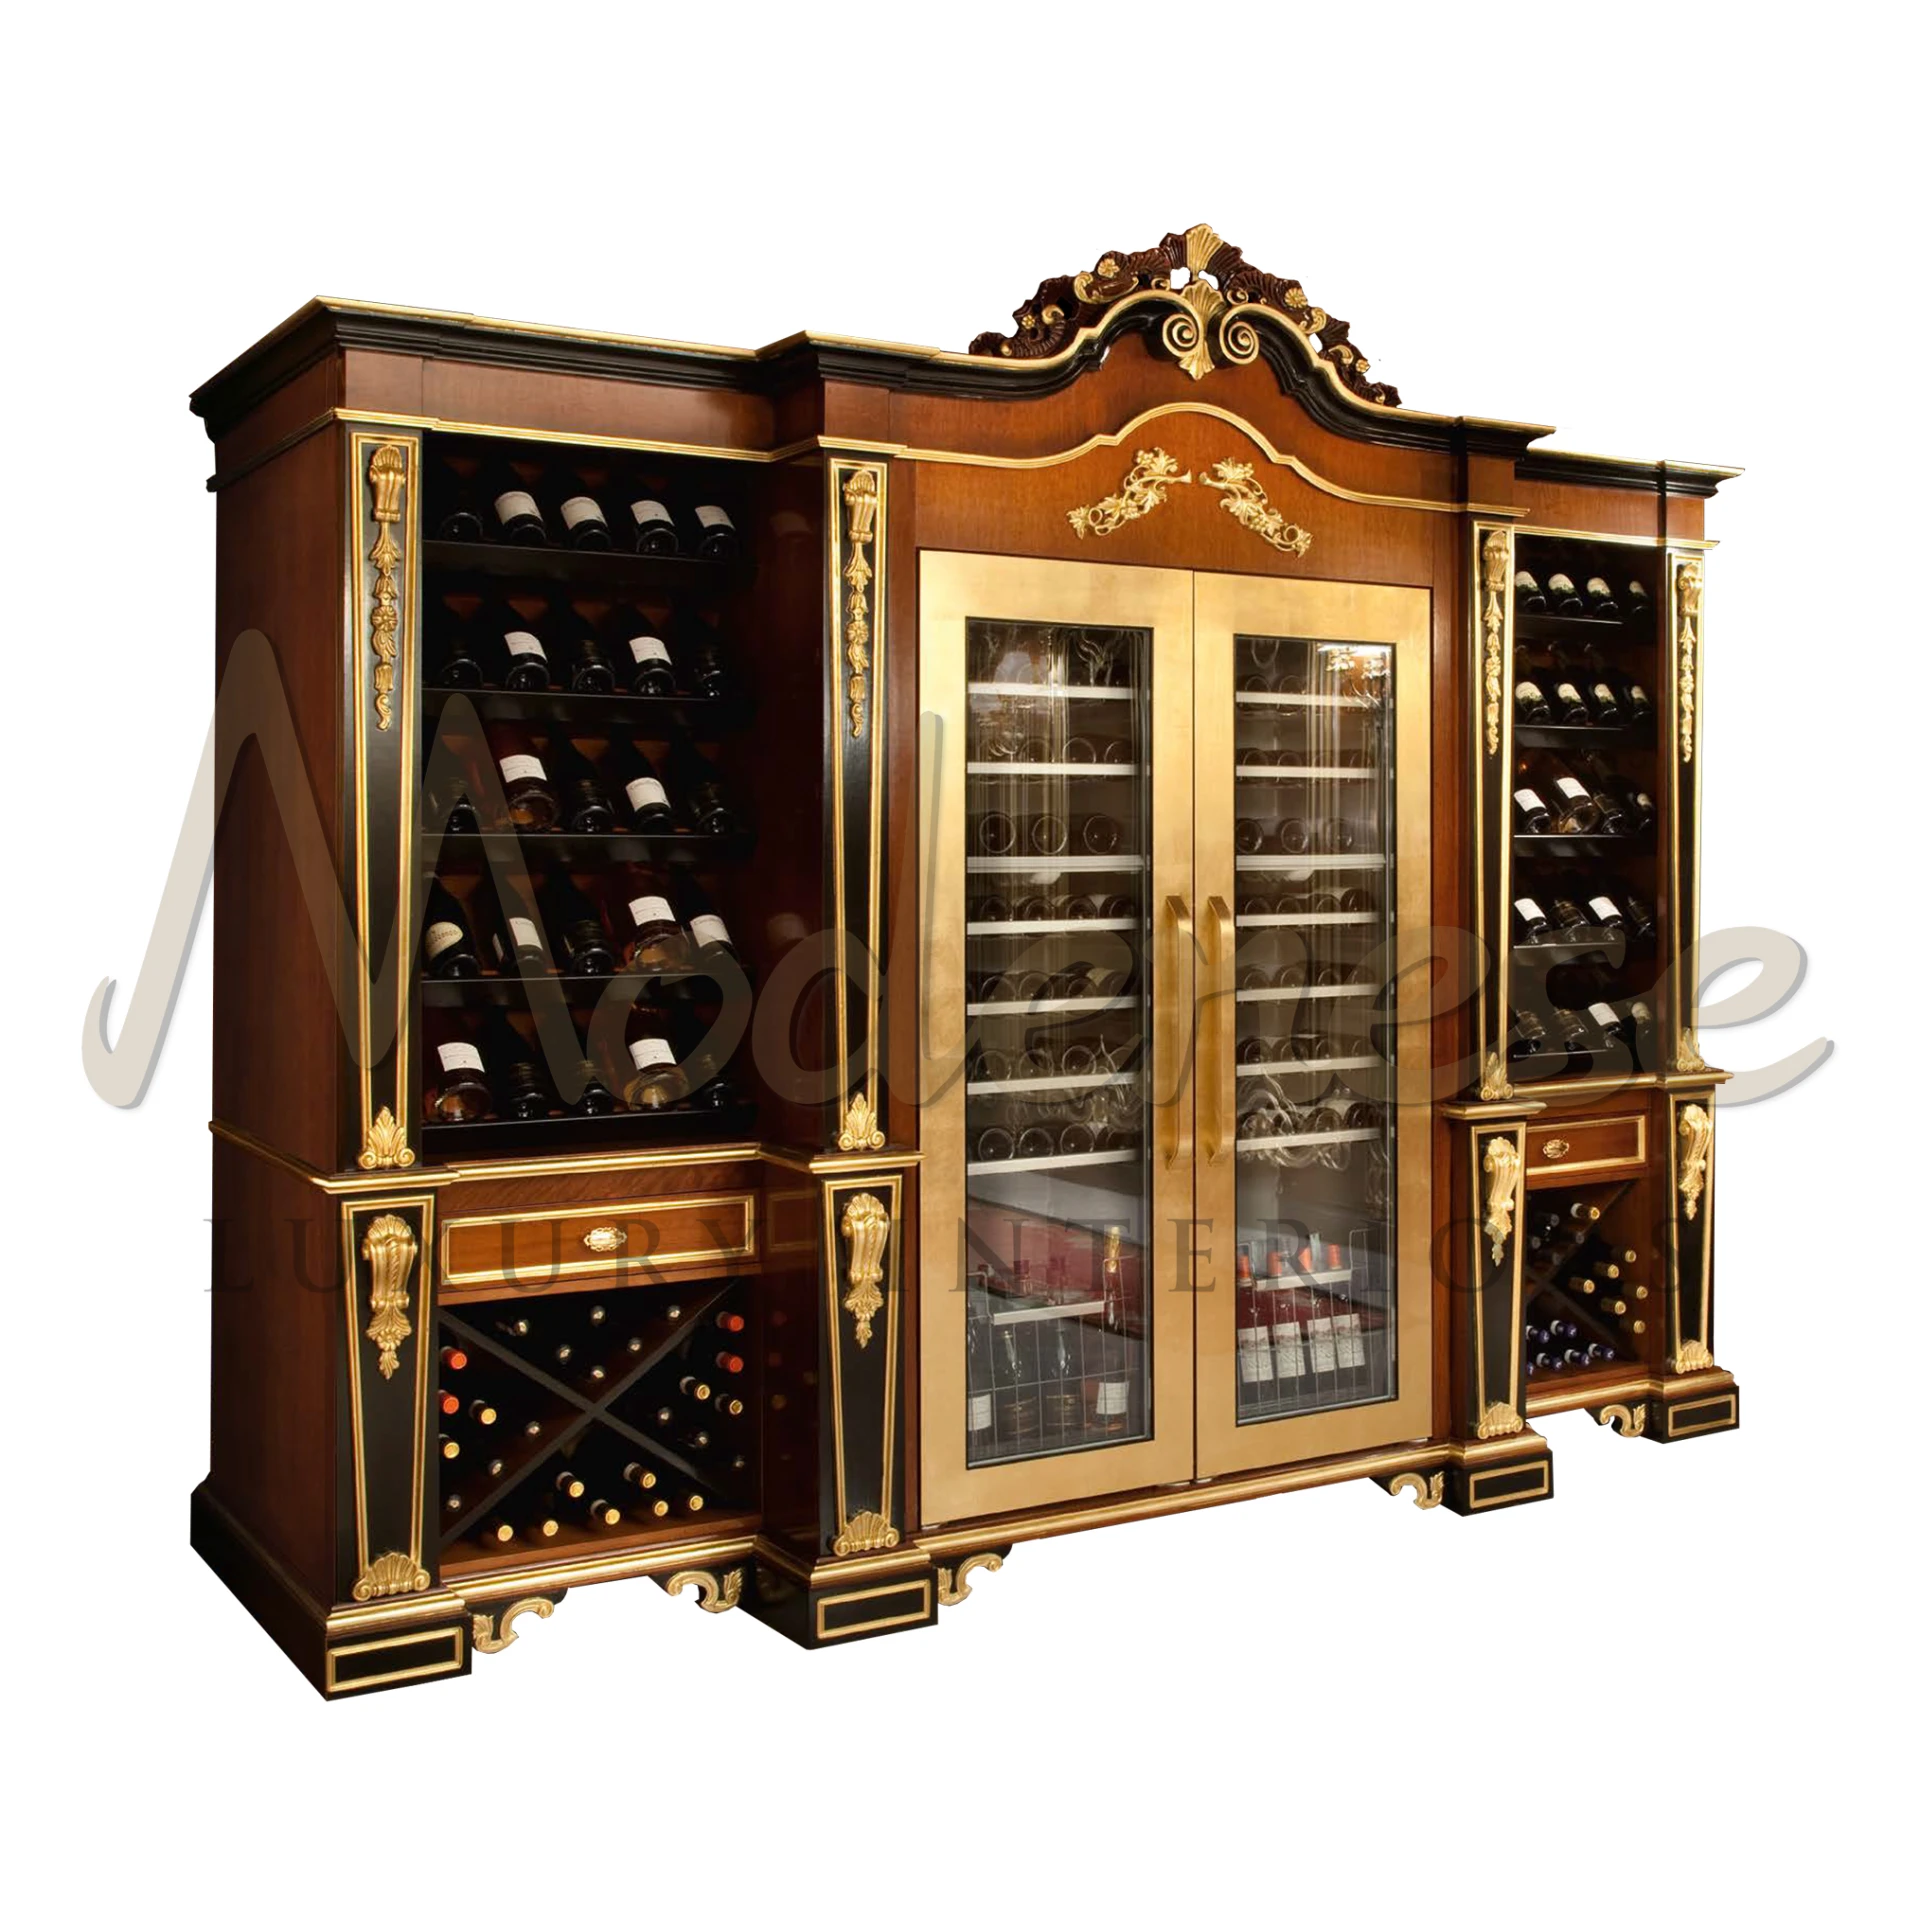 Modenese Furniture's bespoke showcase holds over 100 bottles, featuring a fridge for temperature control. Italian craftsmanship with classic wood, gold, and baroque details.